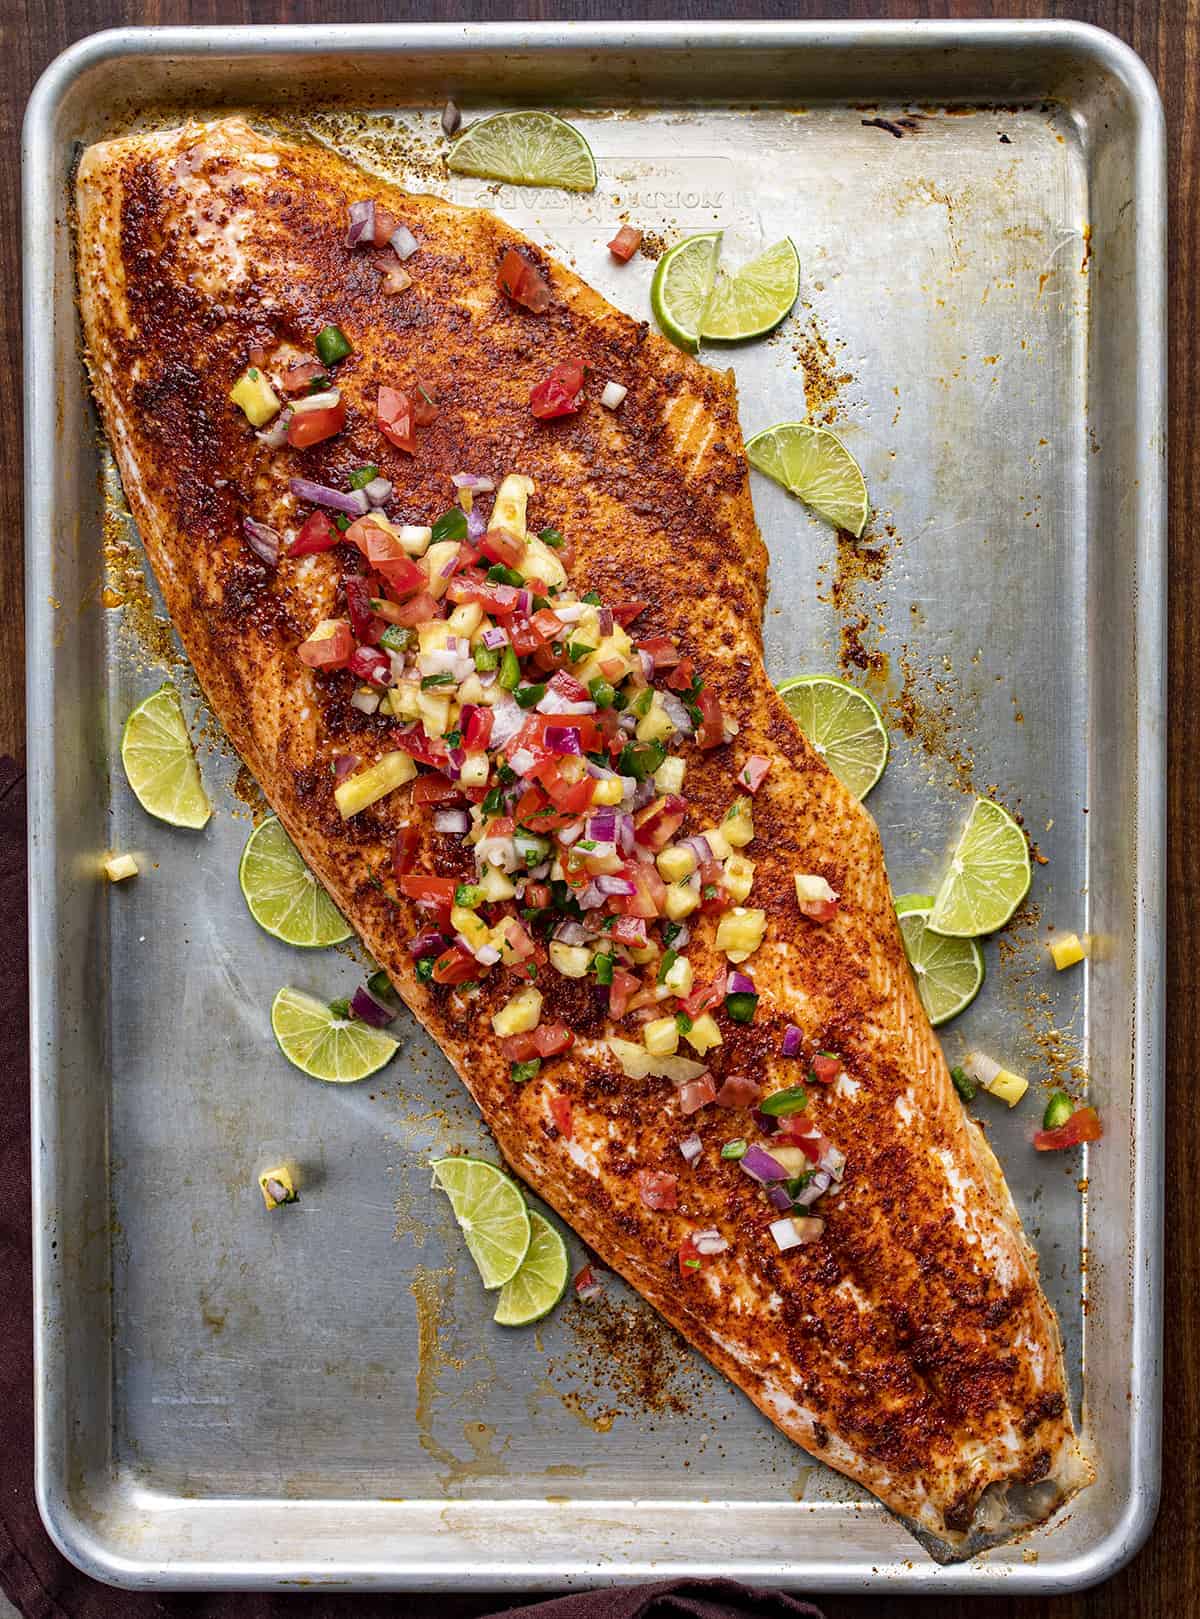 Chili Lime Salmon with Pineapple Salsa on a Pan from Overhead with Limes